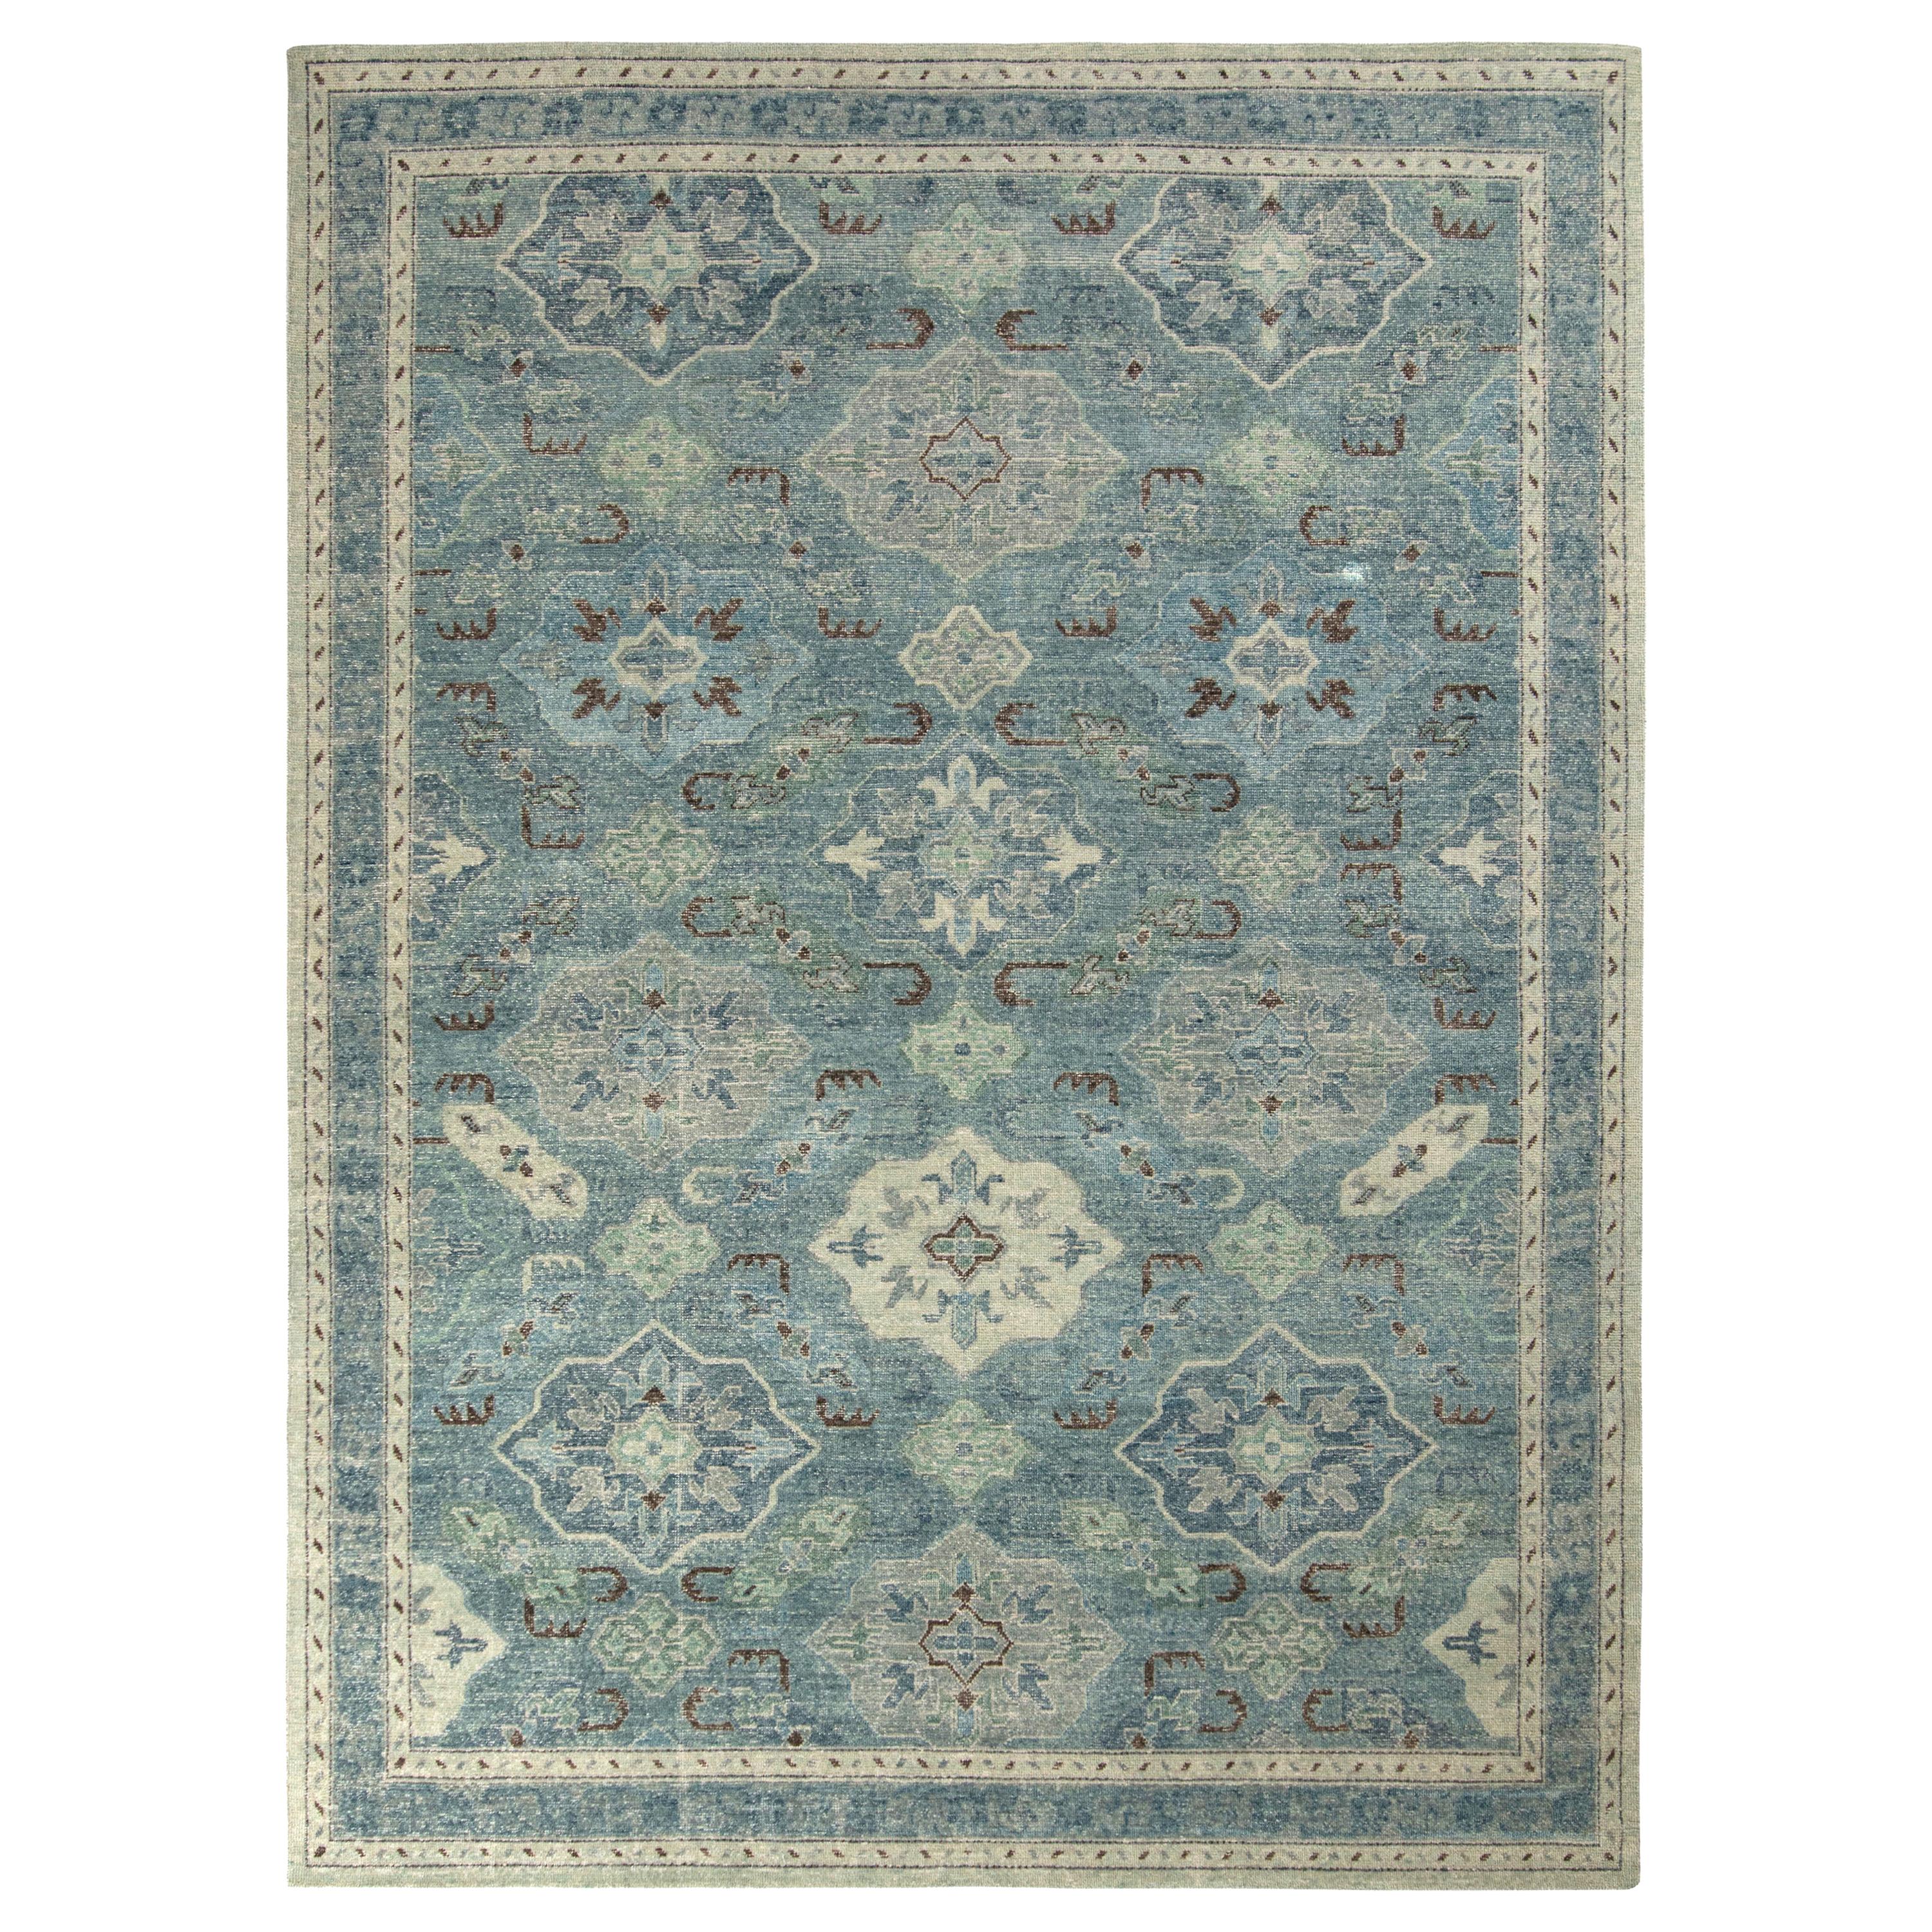 Rug & Kilim’s Distressed Classic Style Rug in Blue and Gray Geometric Pattern